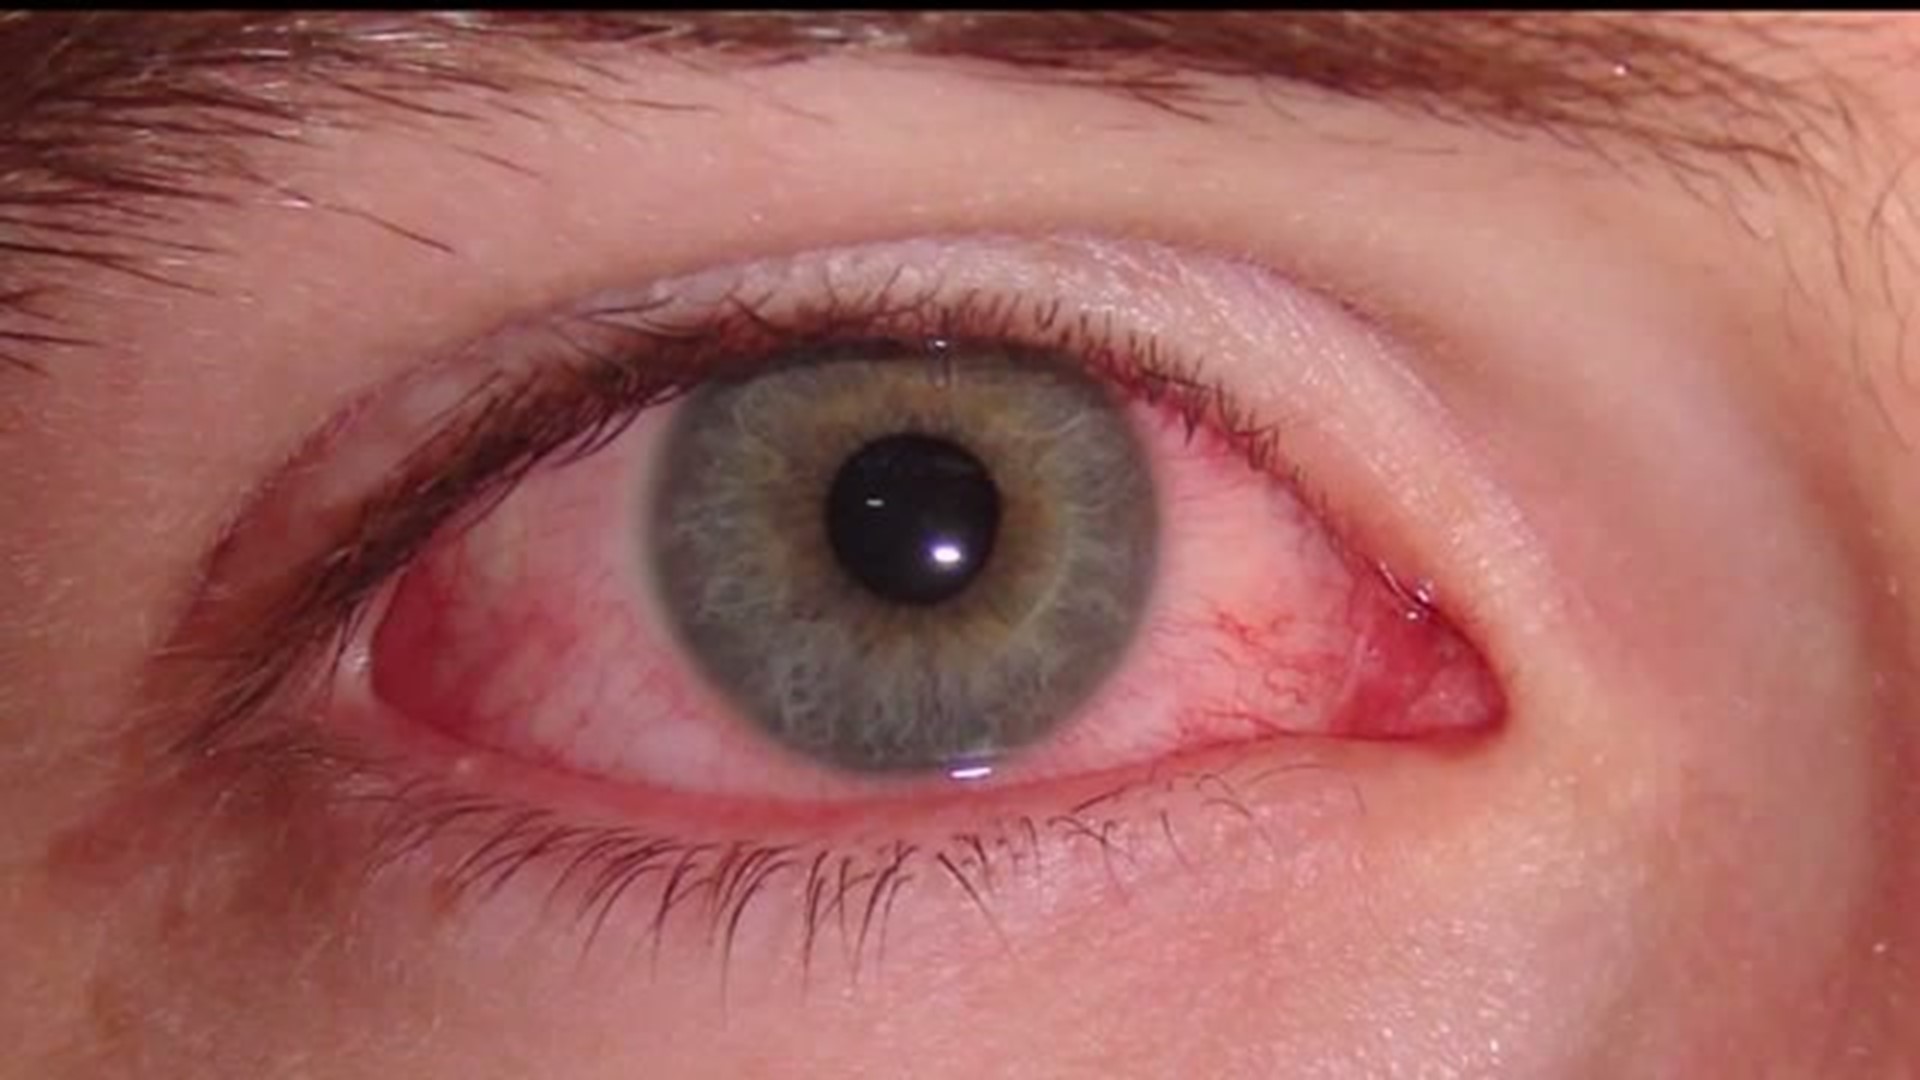 Pink eye can be a pesky ailment among children